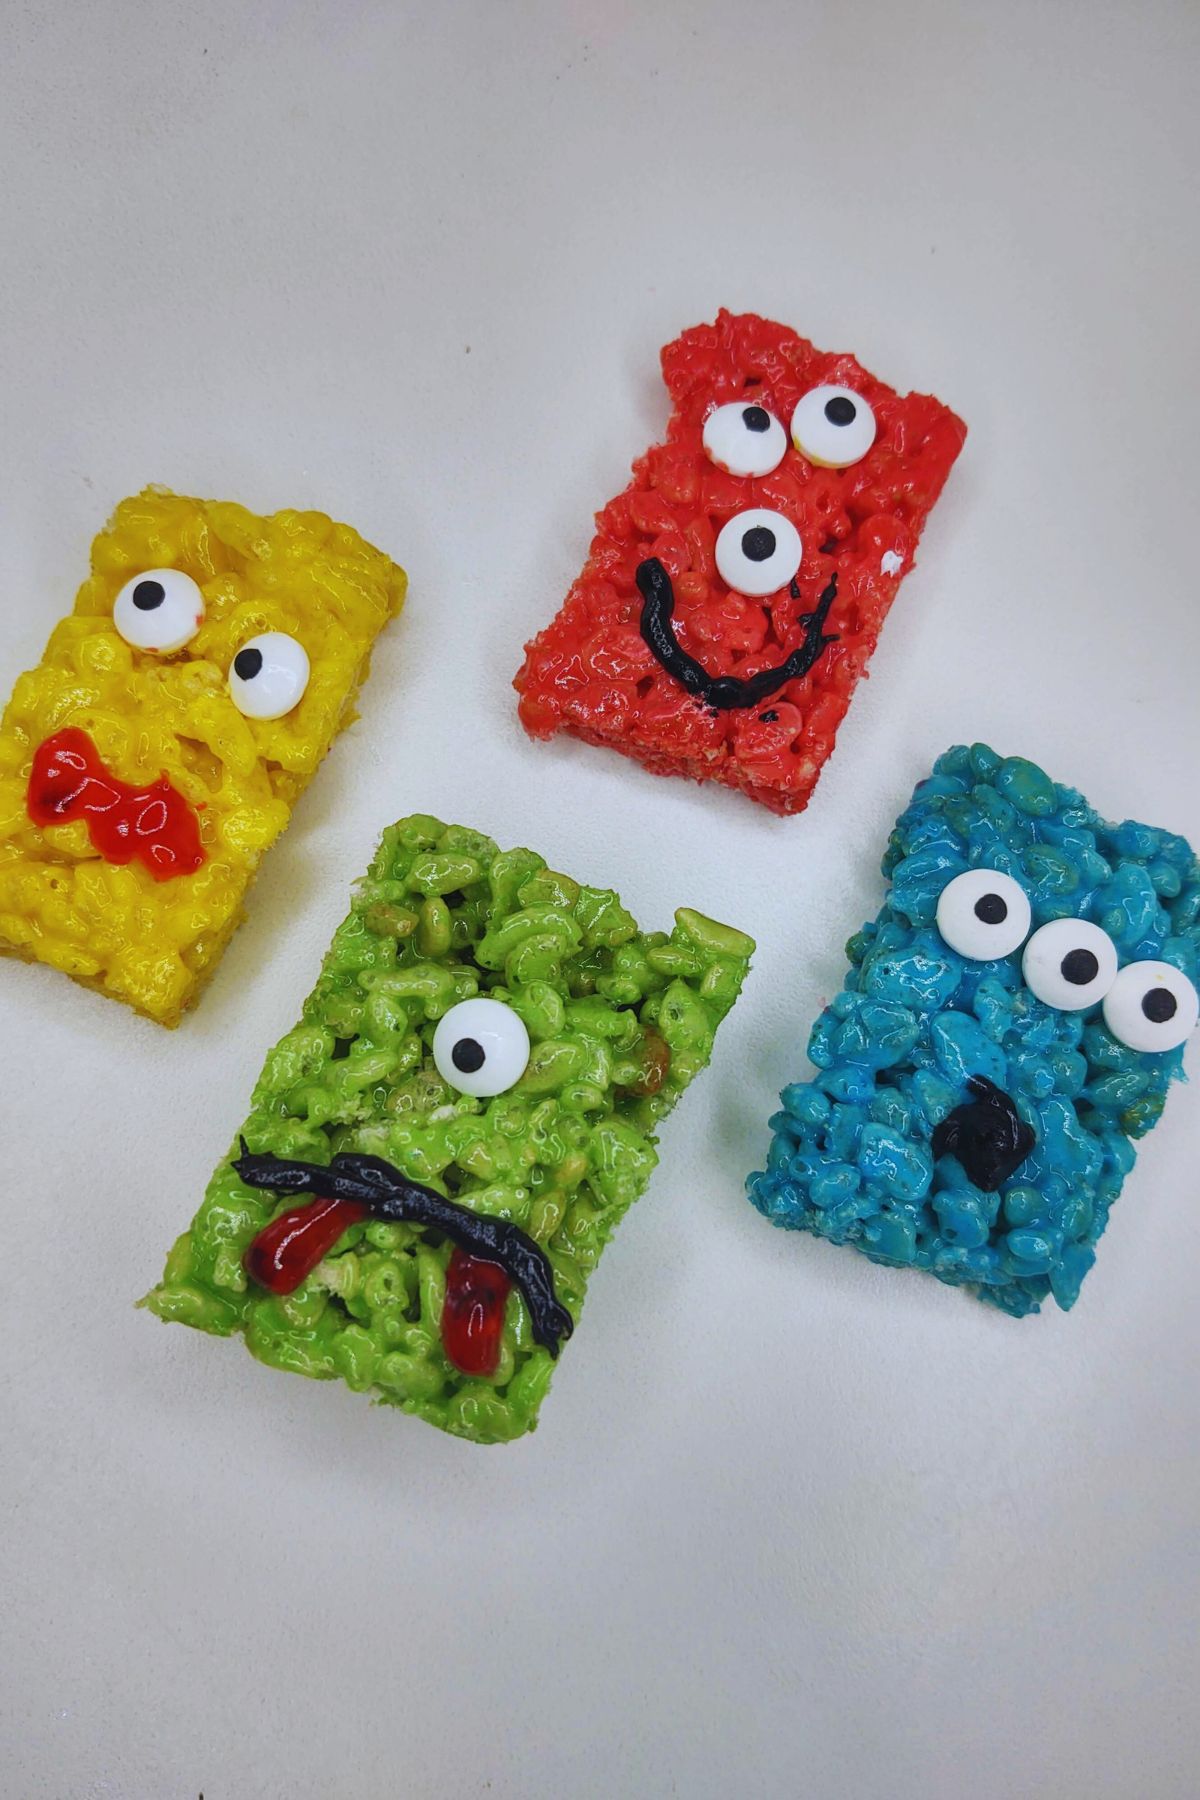 Monster rice krispie treats on a white table.